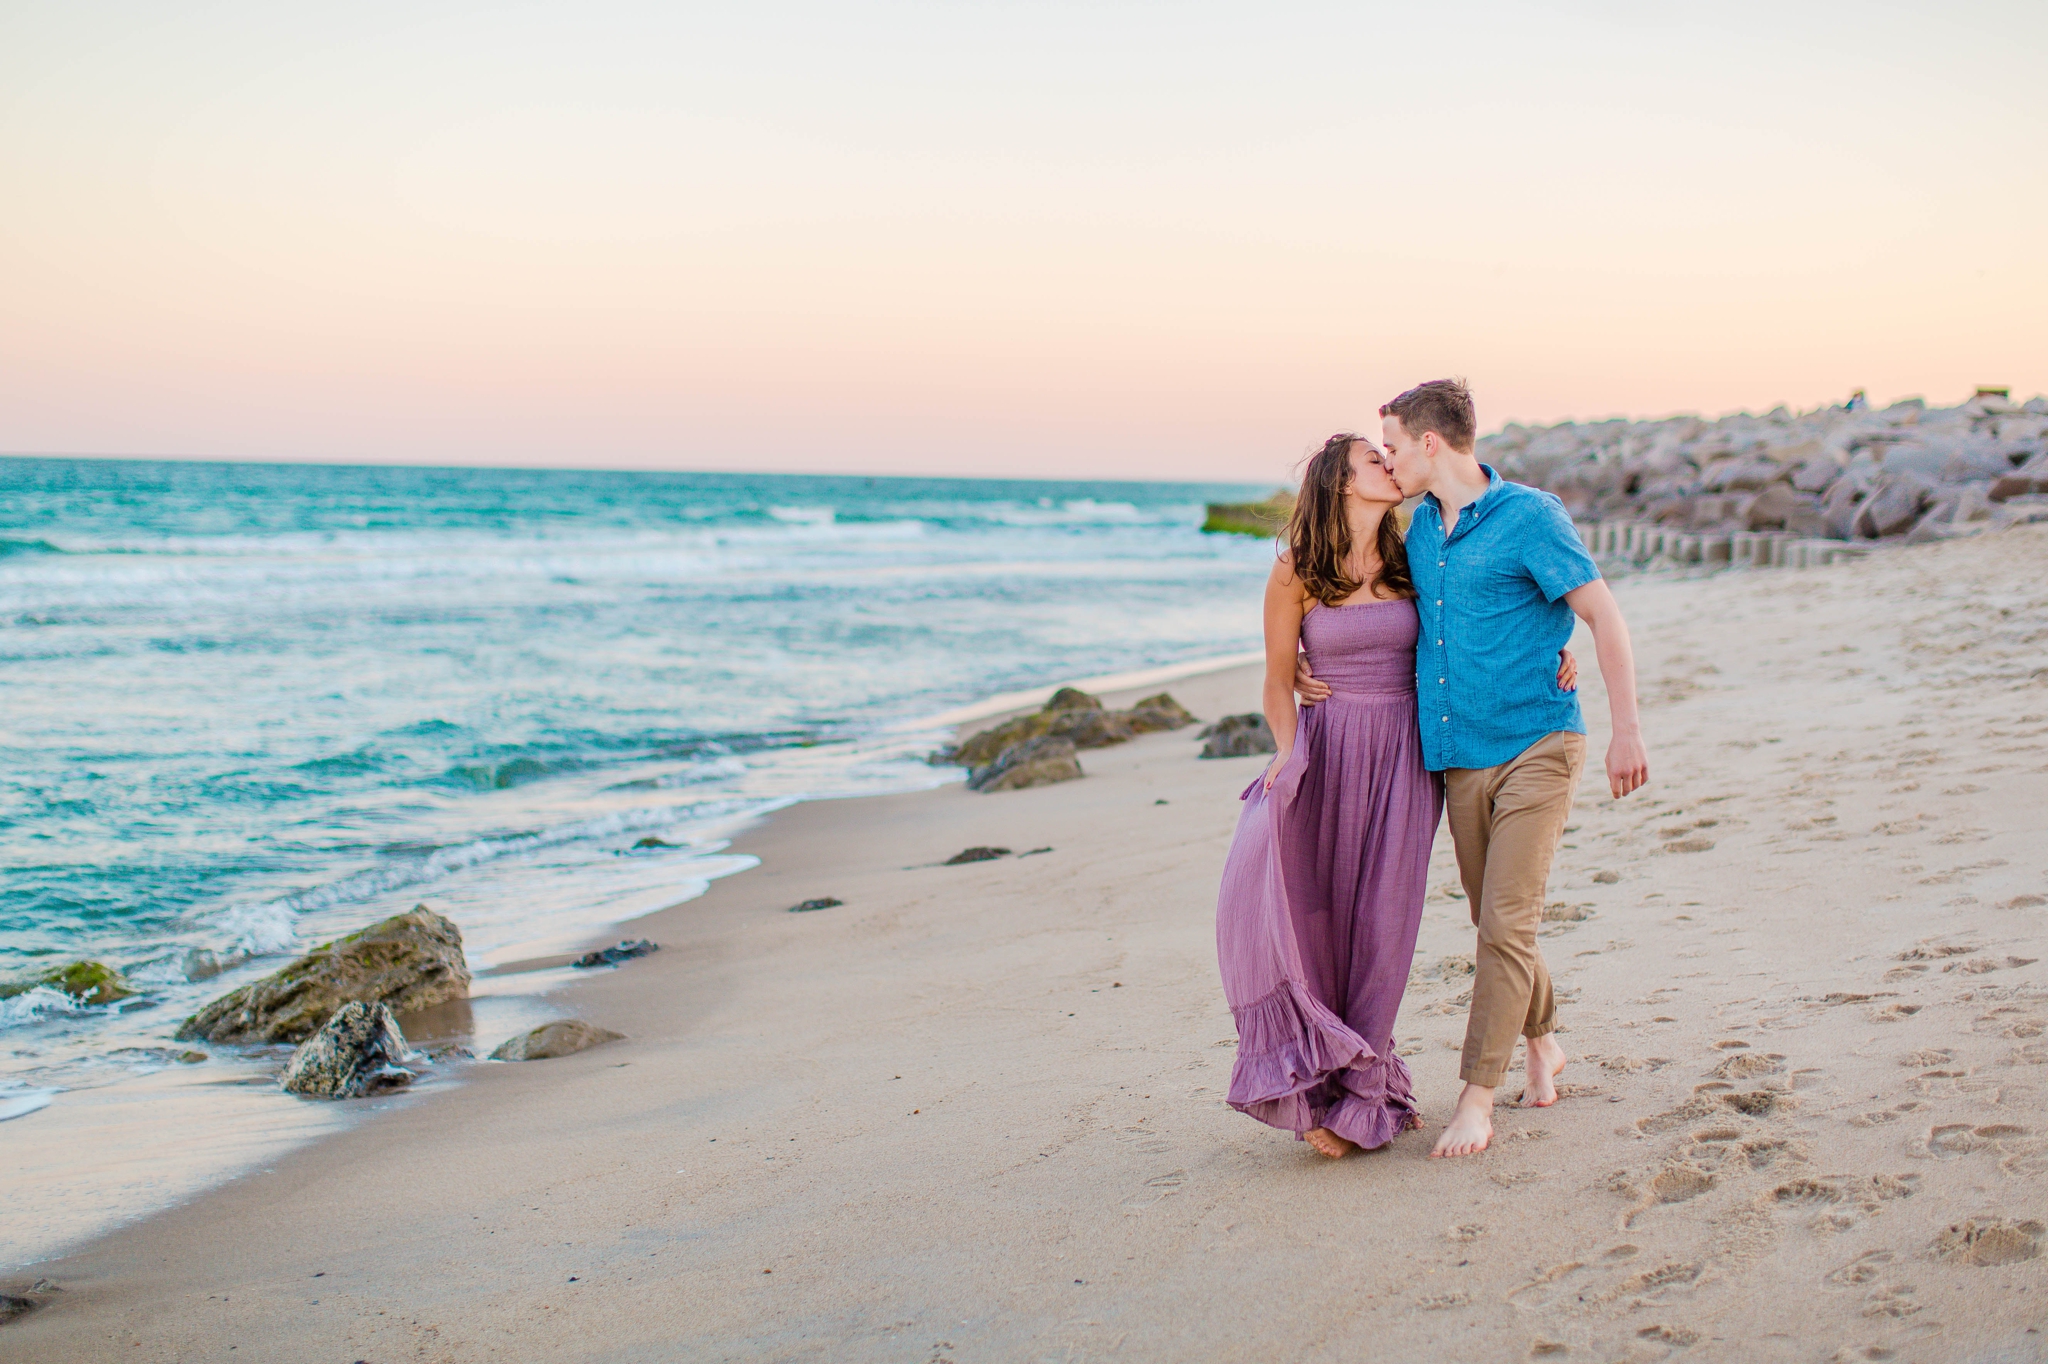  couple walking on the beach while laughing - Woman is in a flowy pastel maxi dress - candid and unposed golden light session - beach engagement photographer in honolulu, oahu, hawaii - johanna dye photography 